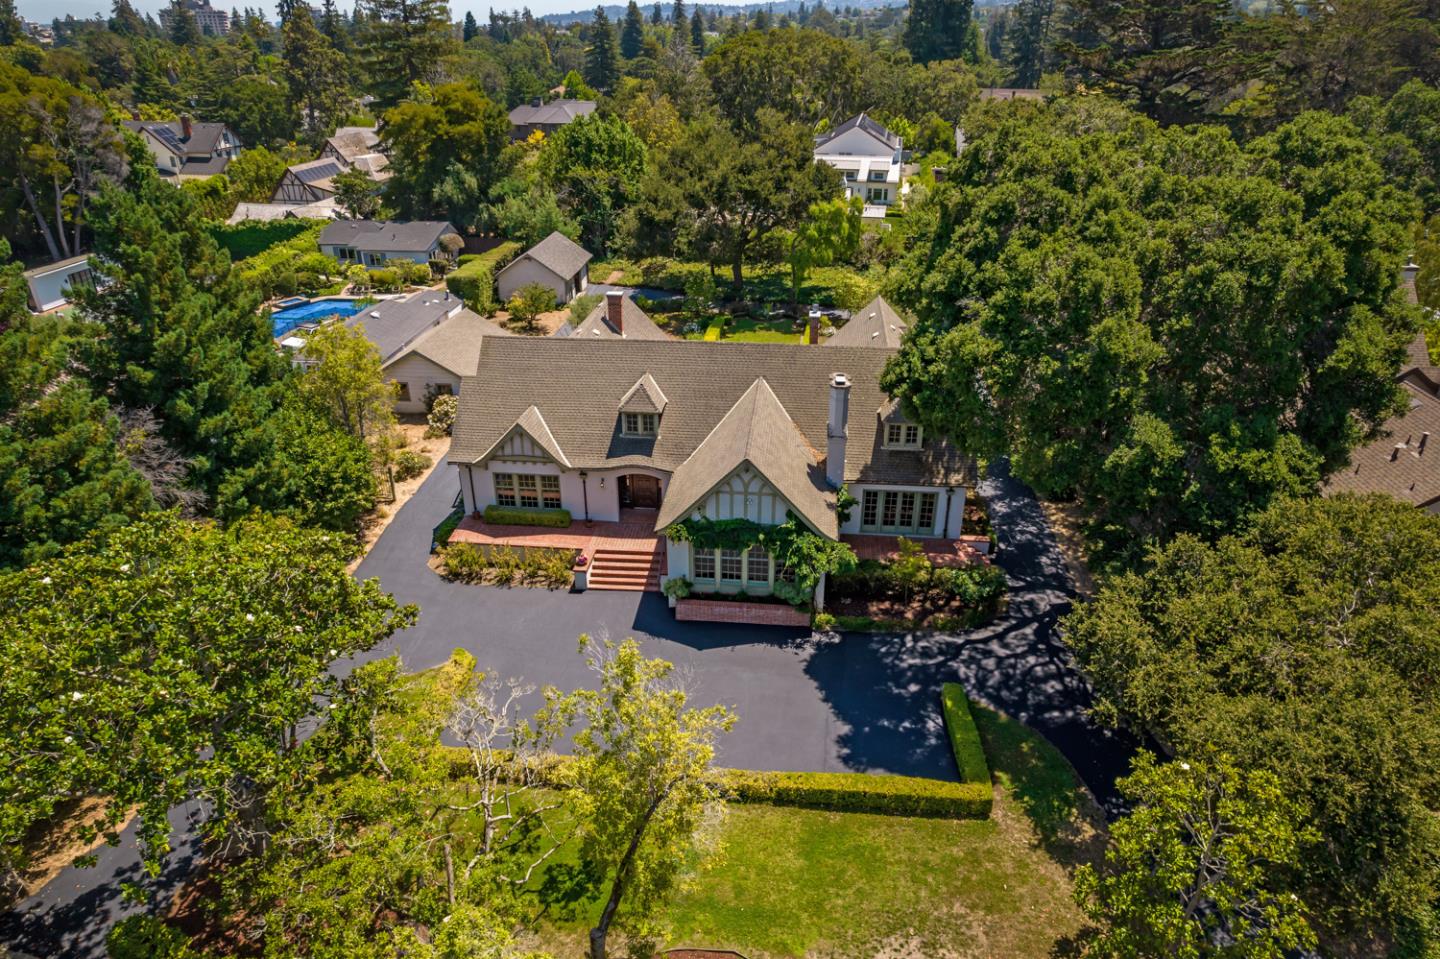 A Rare Opportunity: Iconic Estate on Nearly One Acre in Prestigious San Mateo Park! Rarely does a property of this magnitude become available in desired San Mateo Park! Located on nearly one acre of level grounds, and on the border of Hillsborough, this iconic estate boasts classic Tudor detail with roots dating back to 1924. A testament to earlier era craftmanship, the architecturally impressive home features beautiful hardwood floors, refined millwork, lofty ceilings, and tall true divided light windows throughout its generous one-level design. Expansive formal rooms, an oversized library with fireplace, office, and spacious kitchen with inviting breakfast room comprise the home's grand public spaces. There are three bedrooms, each with vintage tiled baths, plus a convenient half-bath. The vast rear grounds are landscaped in symmetry, adorned with manicured hedges, olive trees, and a large terrace for entertaining, all with a backdrop of lush foliage. A very special place in time!